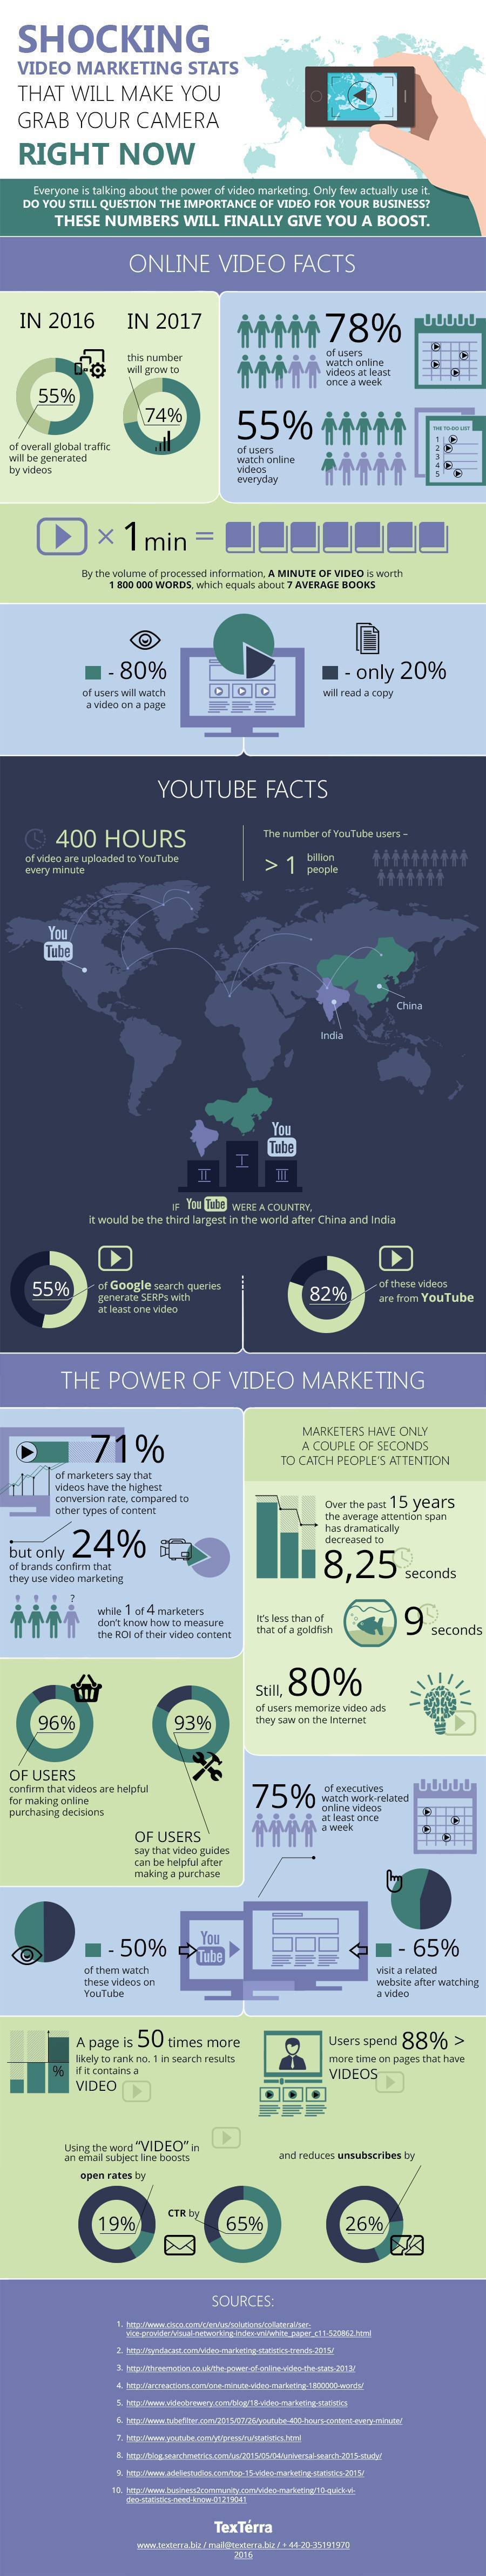 Video Marketing Stats That Will Make You Grab a Cam Right Now